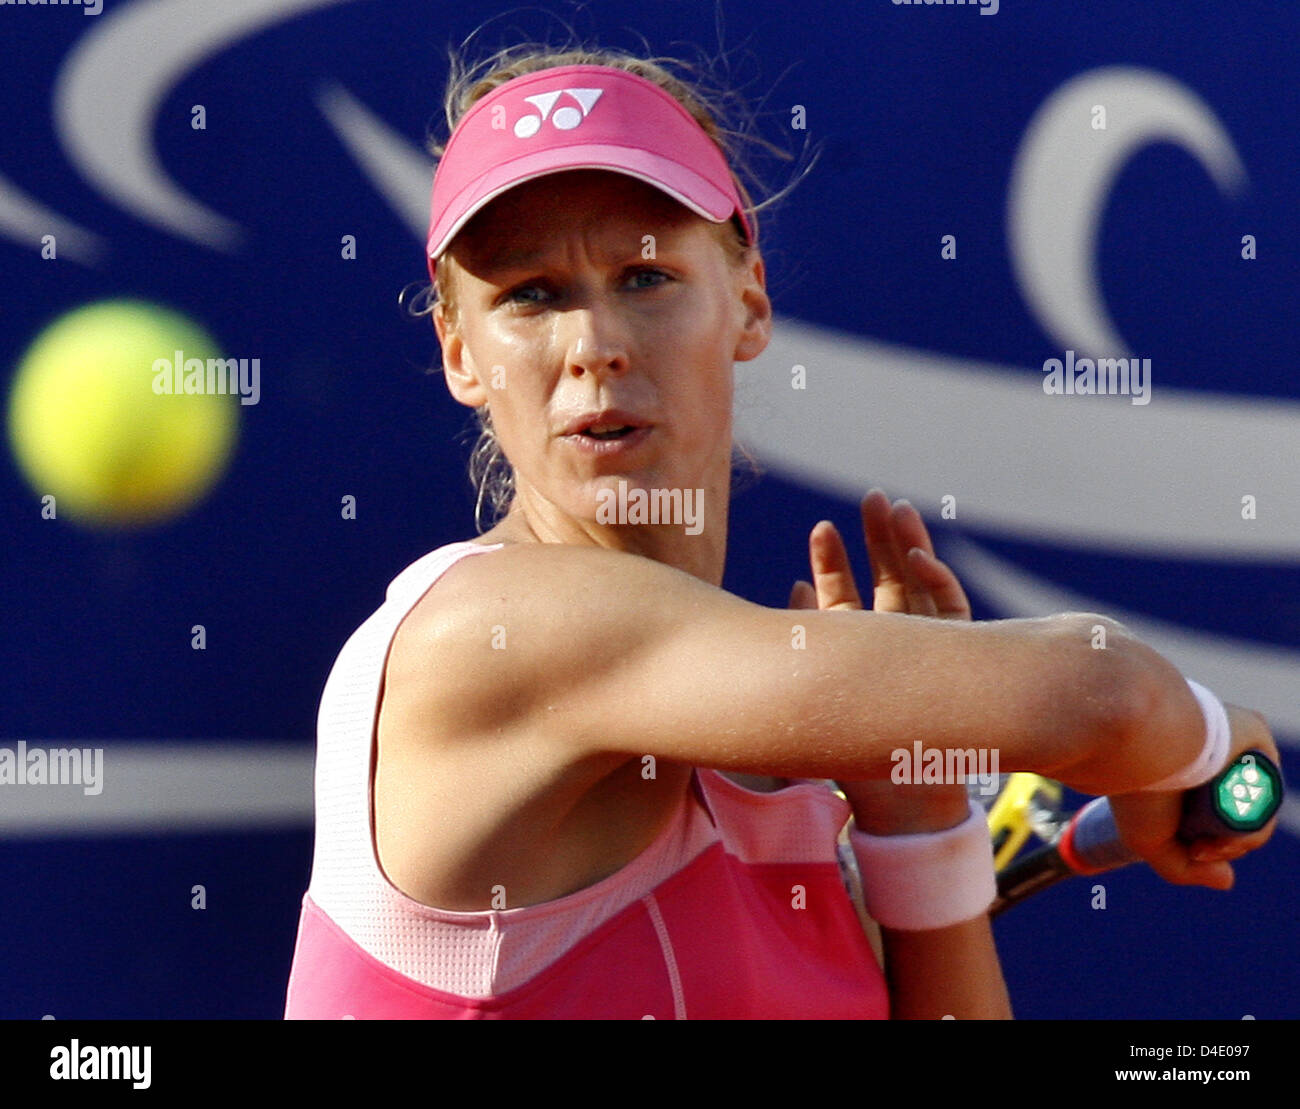 Elena Dementieva of Russia returns a forehand to Jelena Jankovic of Serbia in their quarter-finals match at the WTA German Open in Berlin, Germany, 09 May 2008. Photo: WOLFGANG KUMM Stock Photo